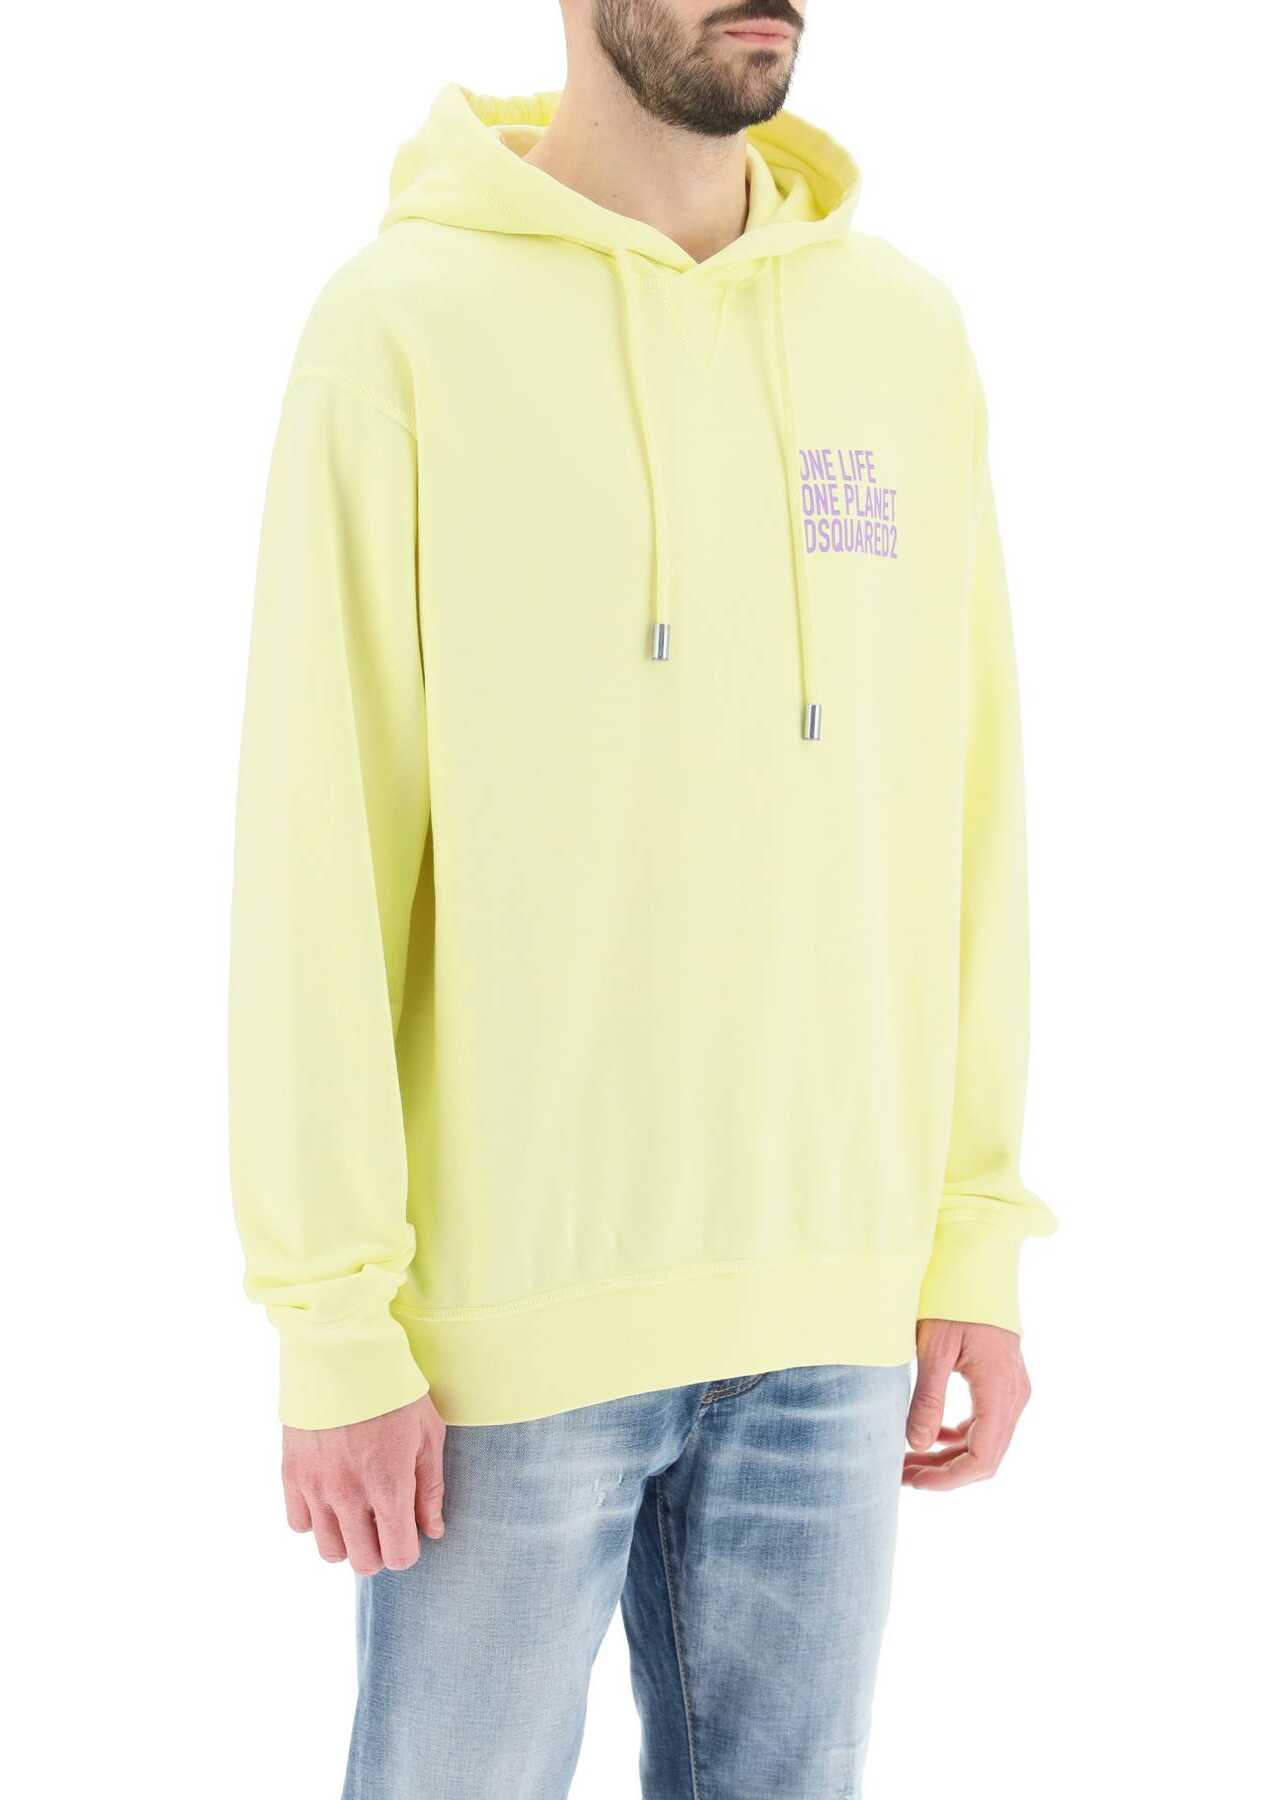 DSQUARED2 One Life One Planet Hoodie DUSTY LEMONADE